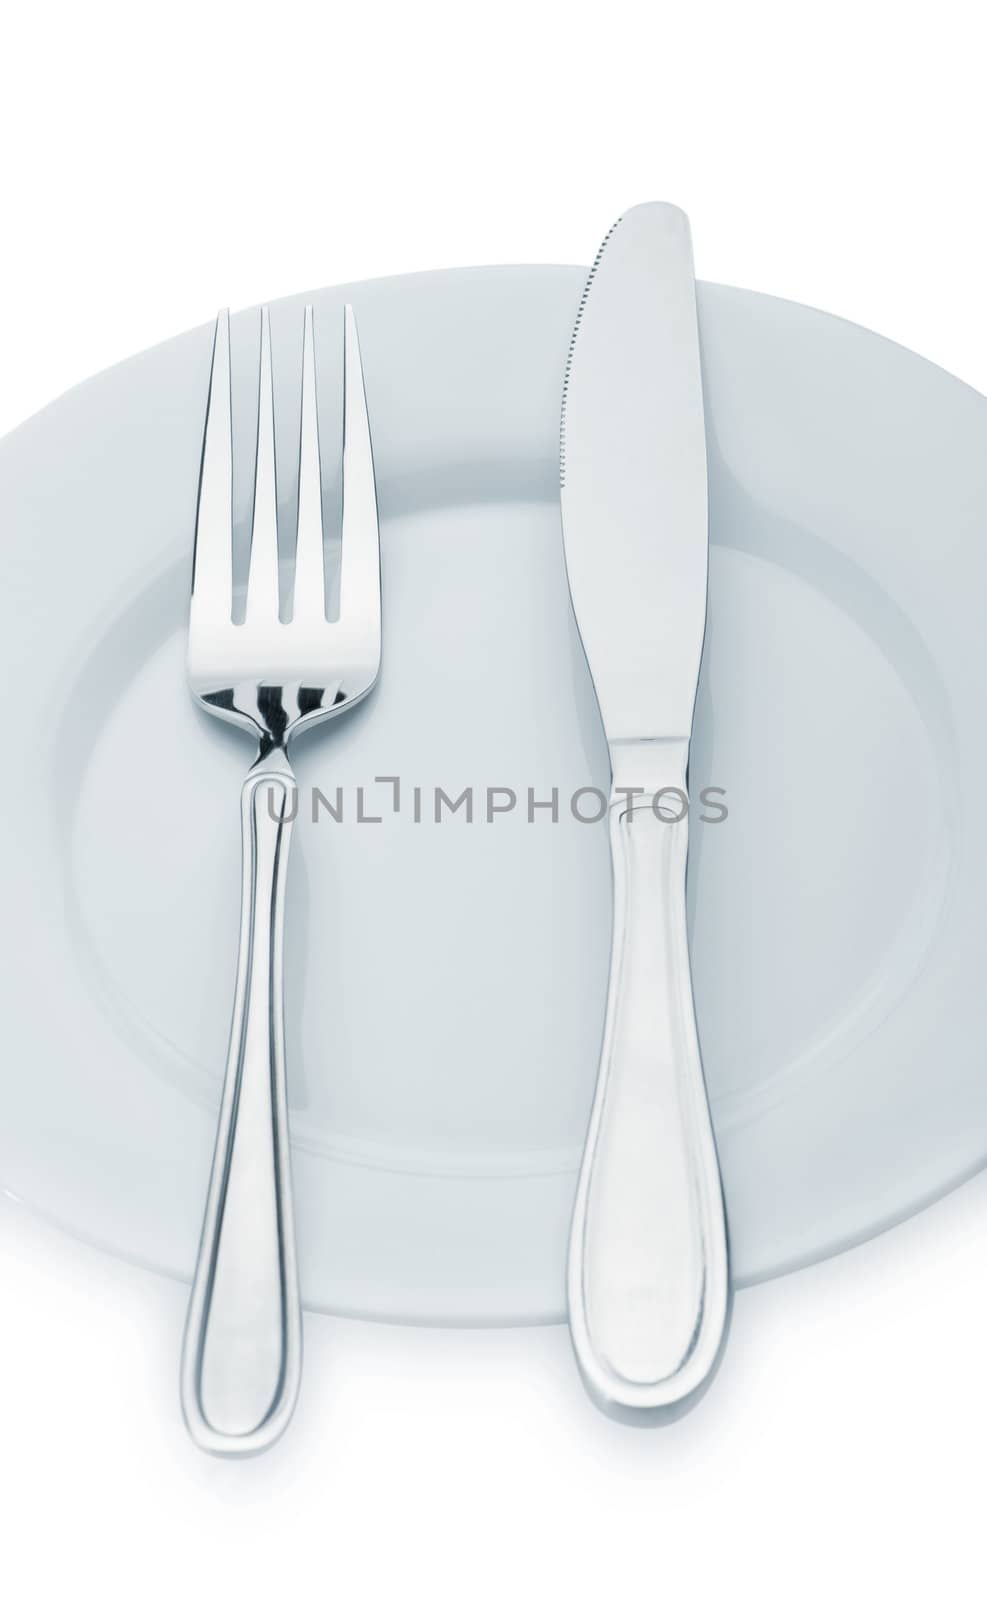 Knife and fork on a plate by galdzer